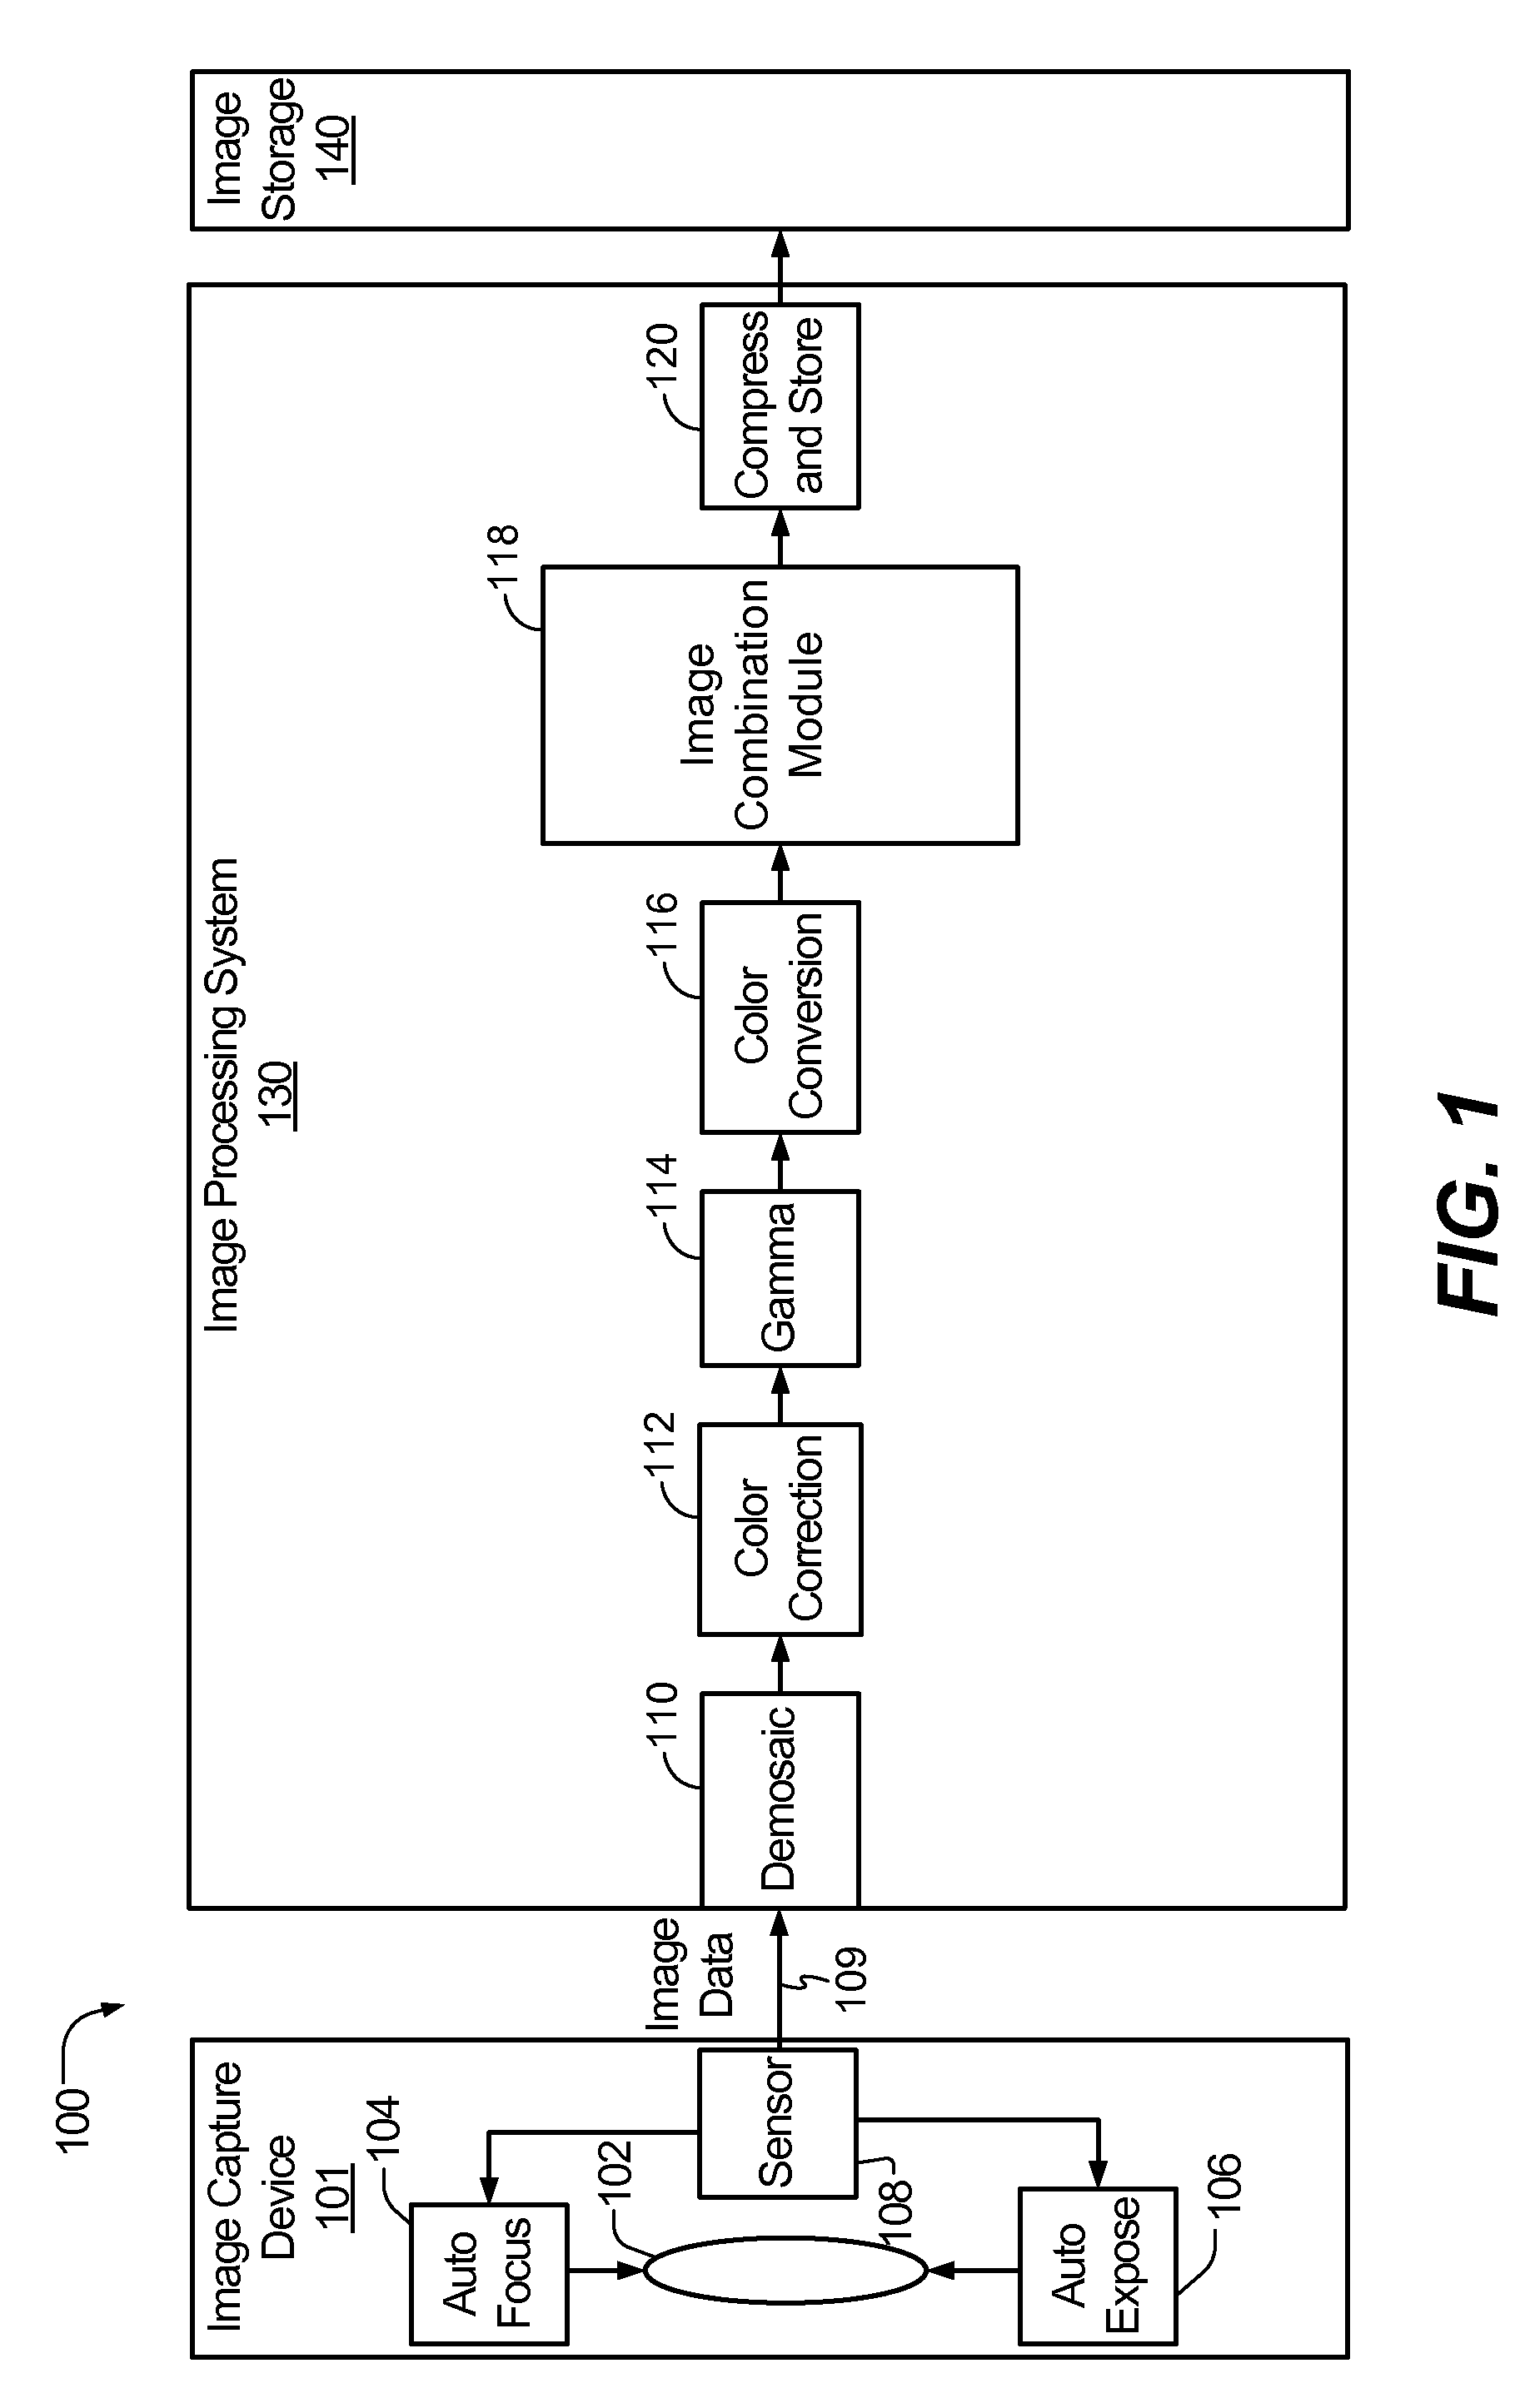 System and method to selectively combine video frame image data